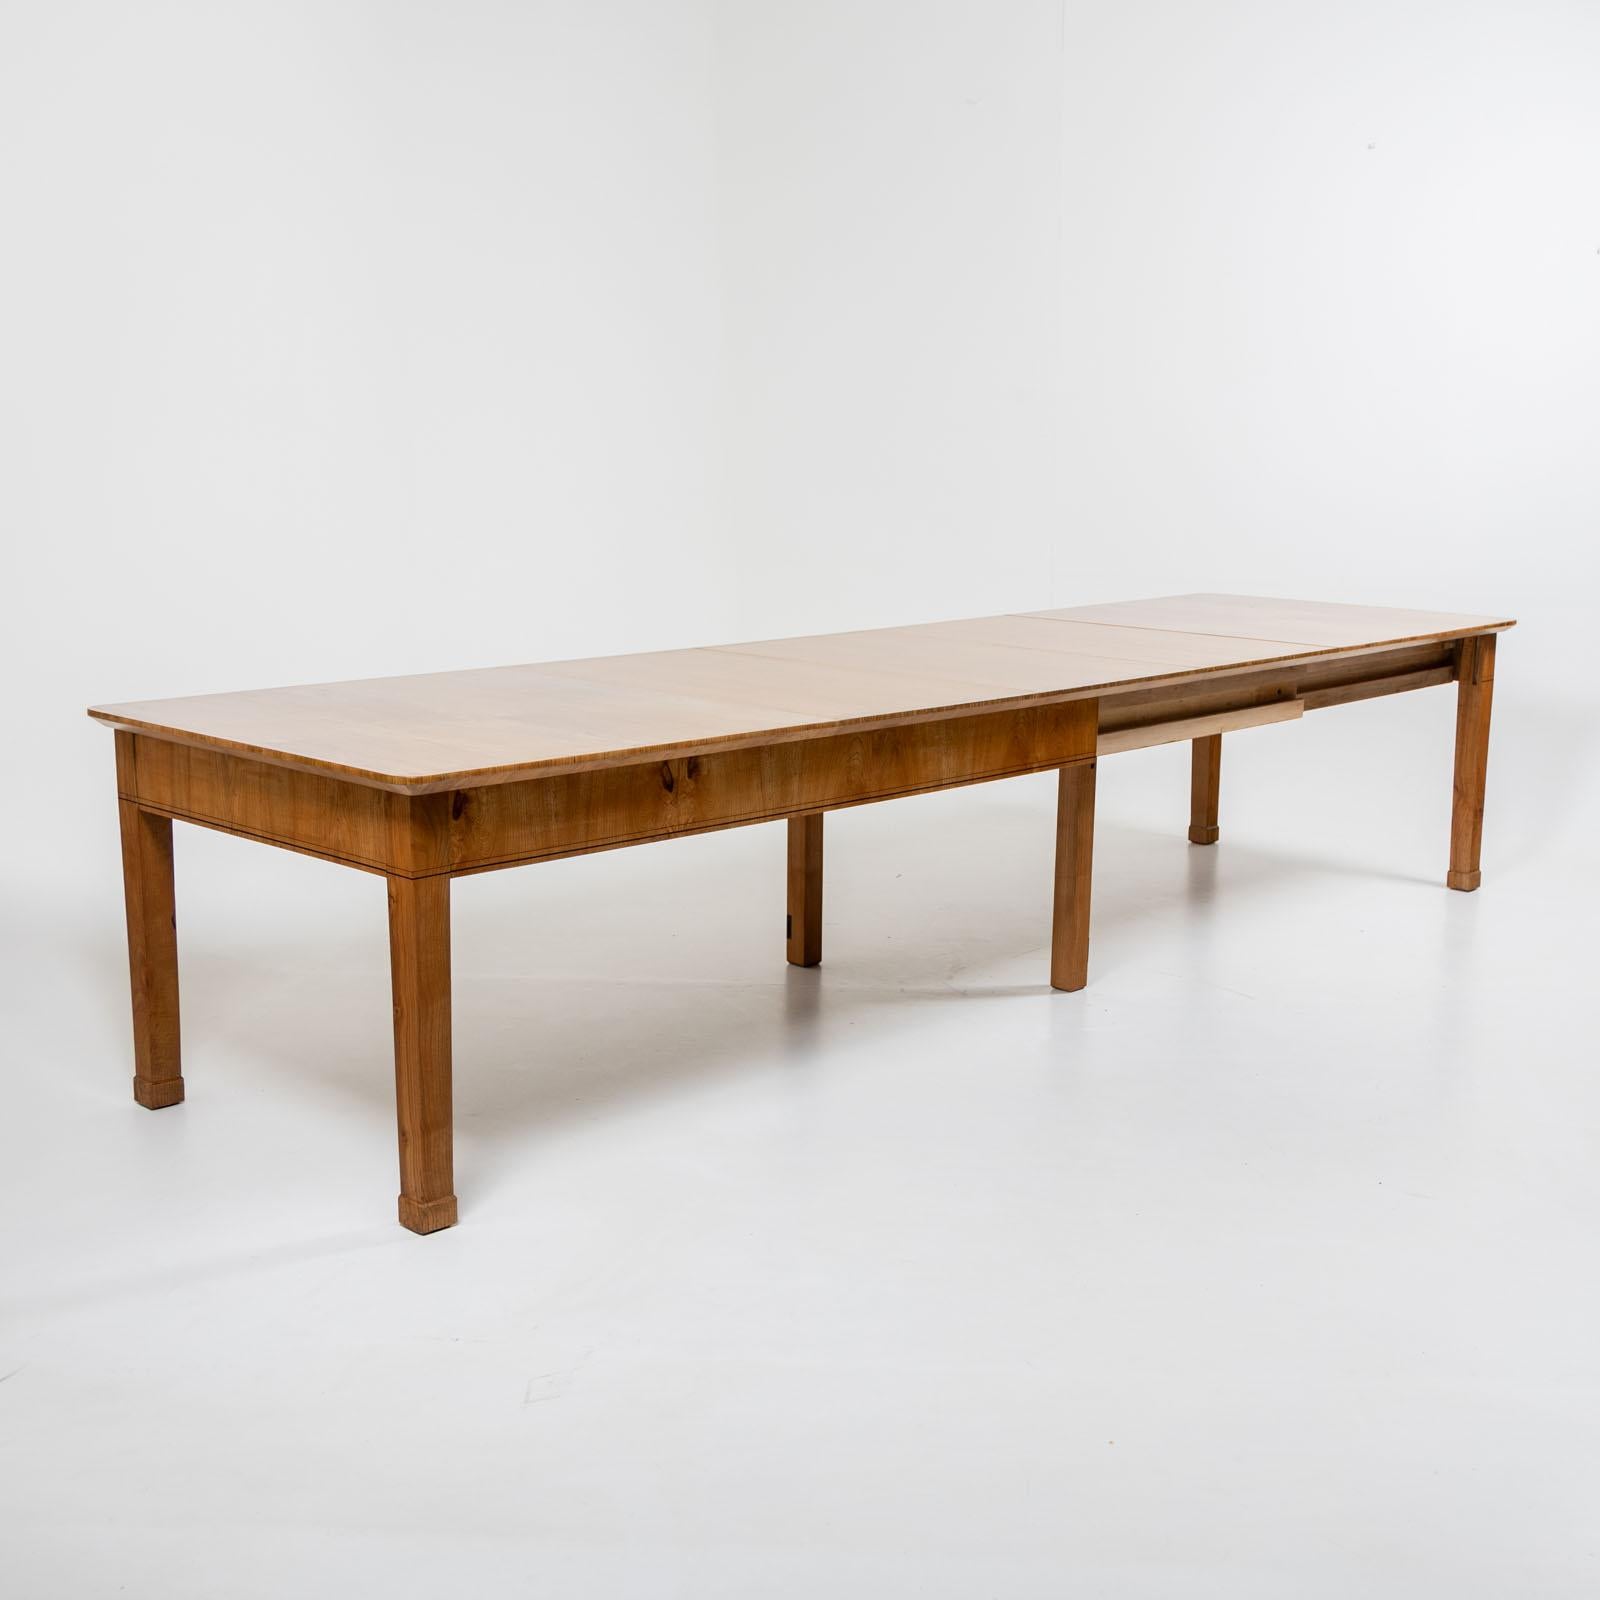 Large Biedermeier dining table with three additional extension leaves (62 cm each) on square legs and a straight frame. The table is made of ash wood and has been polished by hand. The table can be extended to a total length of 380 cm. Two fold-out